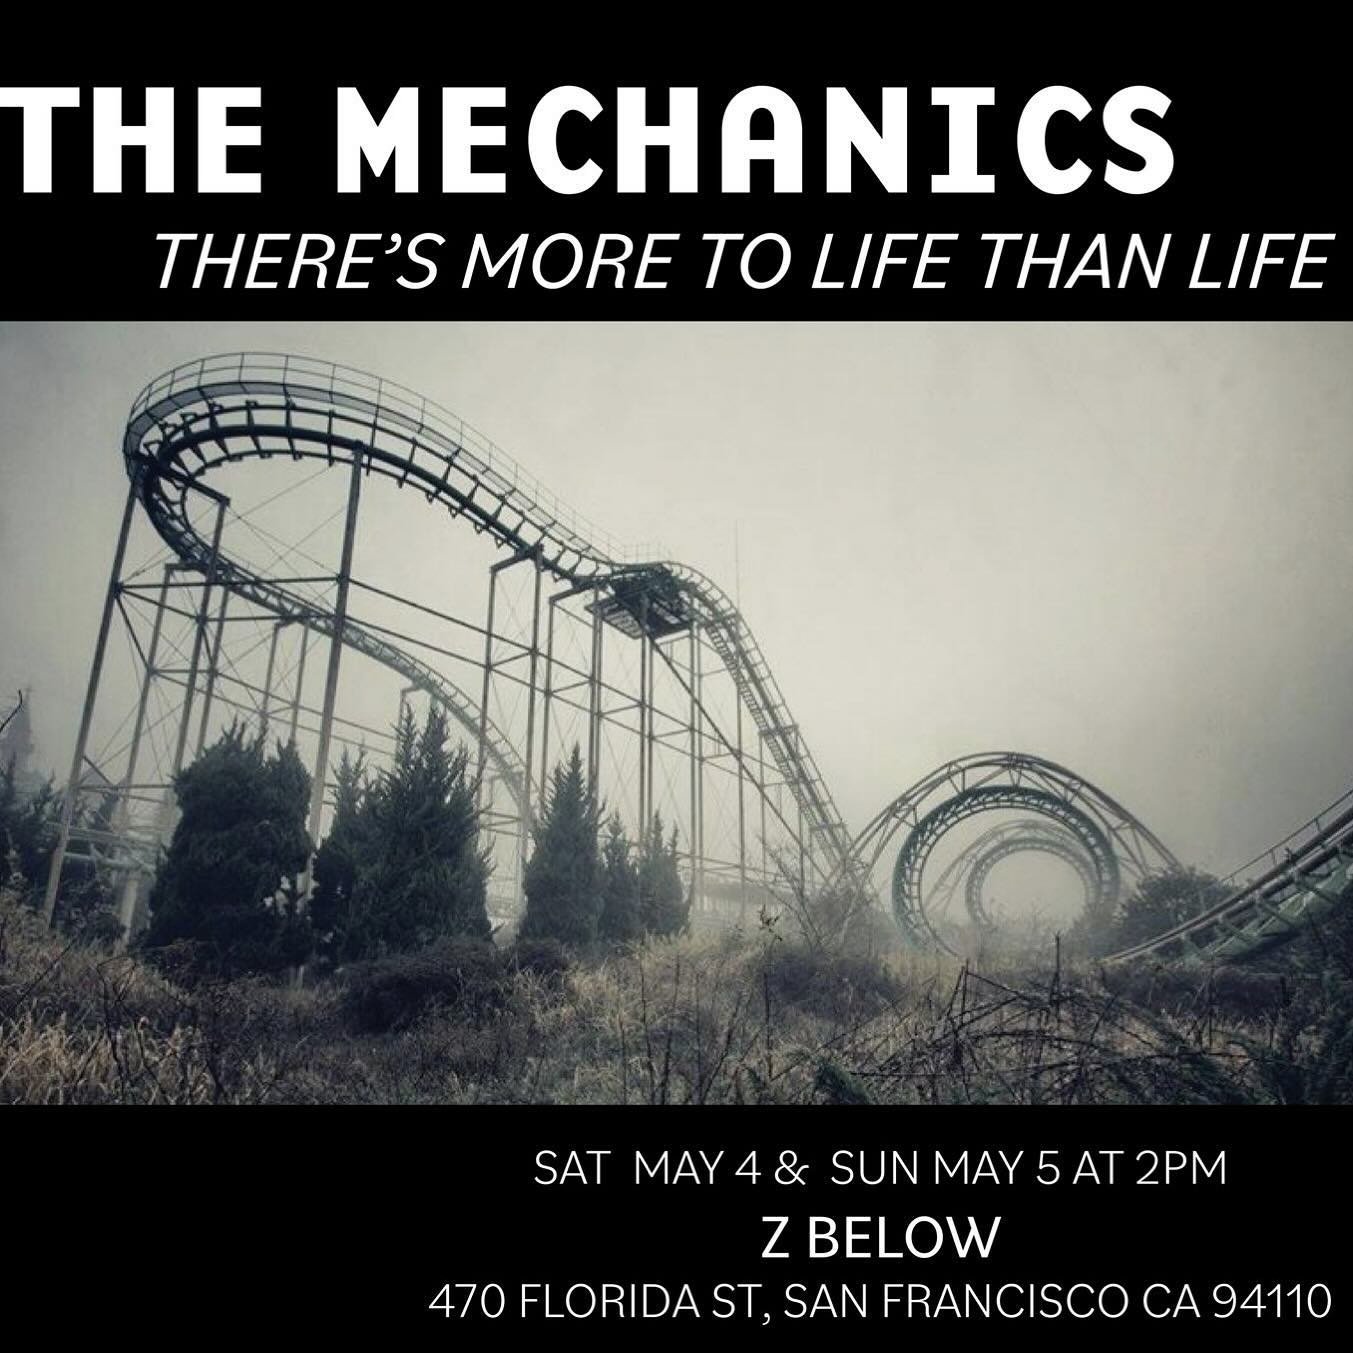 Continuing their Artist in Residency at Z Space, Thrillride Mechanics is excited to present THE MECHANICS, a work-in-progress production in collaboration with The Cosmic Elders and Circuit Network. Playing at Z Below on Saturday, May 4 and Sunday, Ma